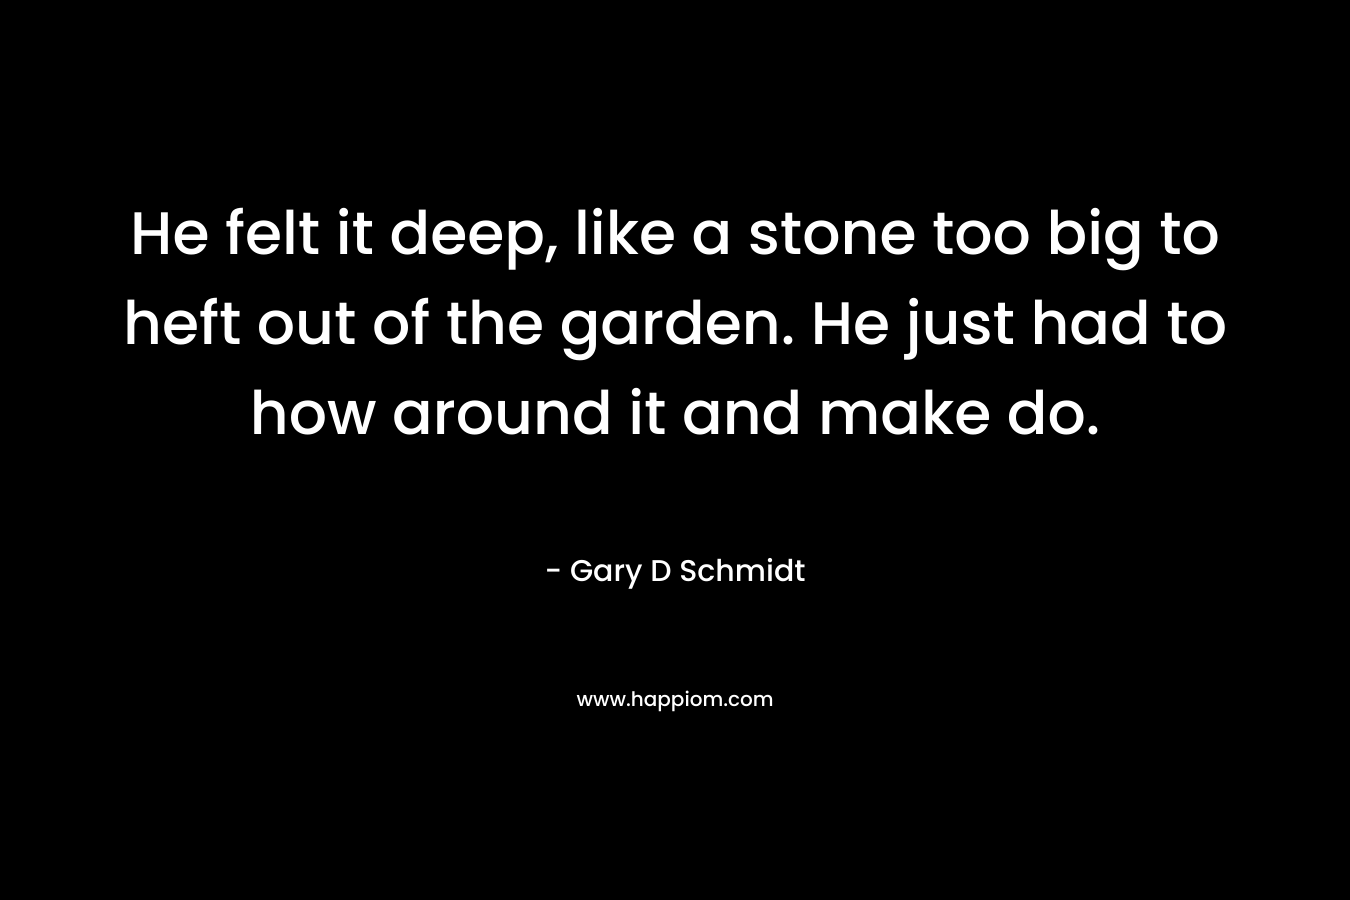 He felt it deep, like a stone too big to heft out of the garden. He just had to how around it and make do.